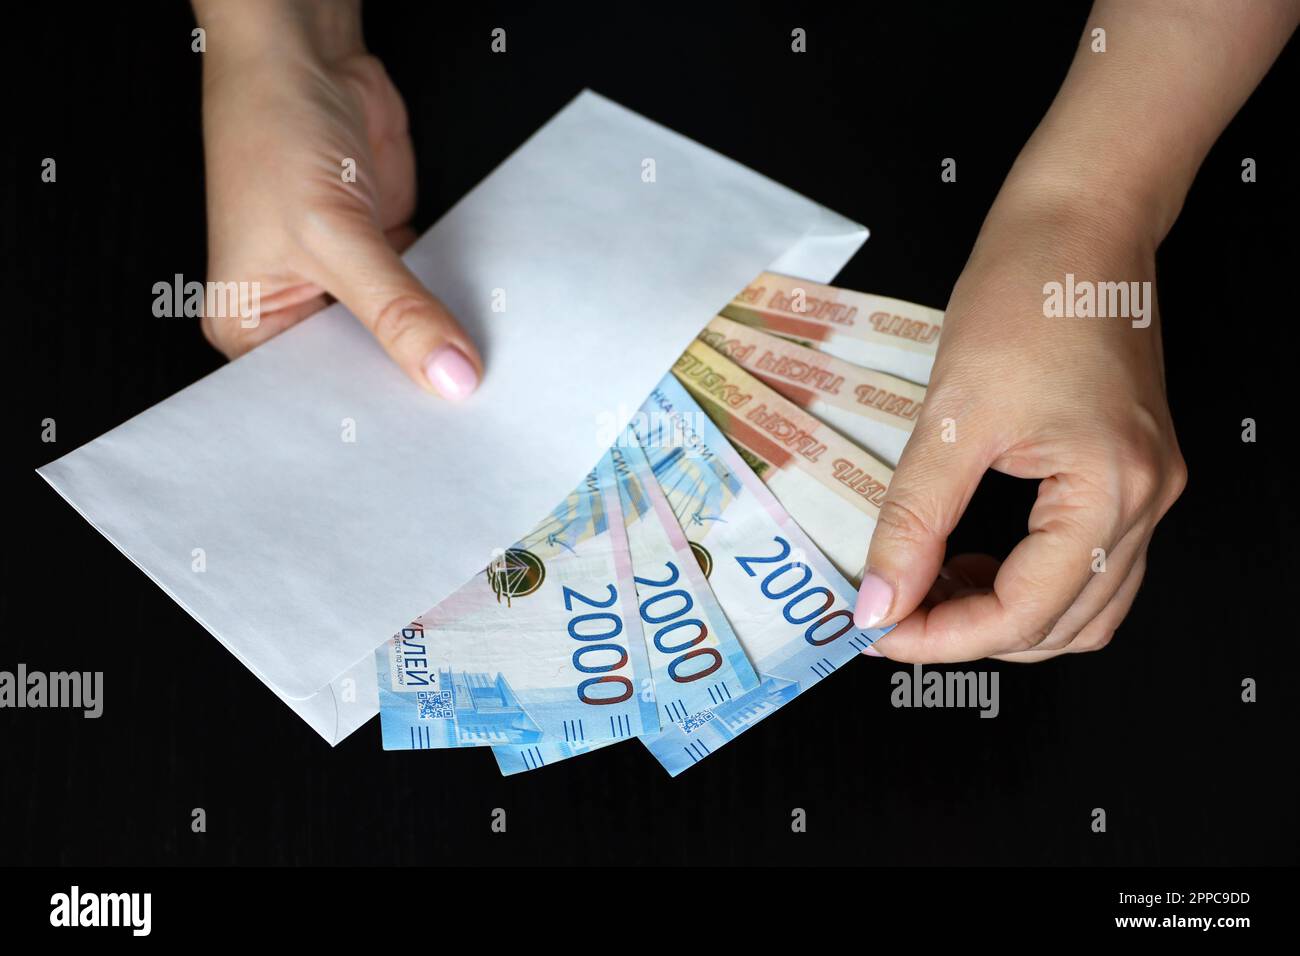 Envelope with russian rubles in female hands on black background. Wages in Russia, bonus or bribe concept Stock Photo